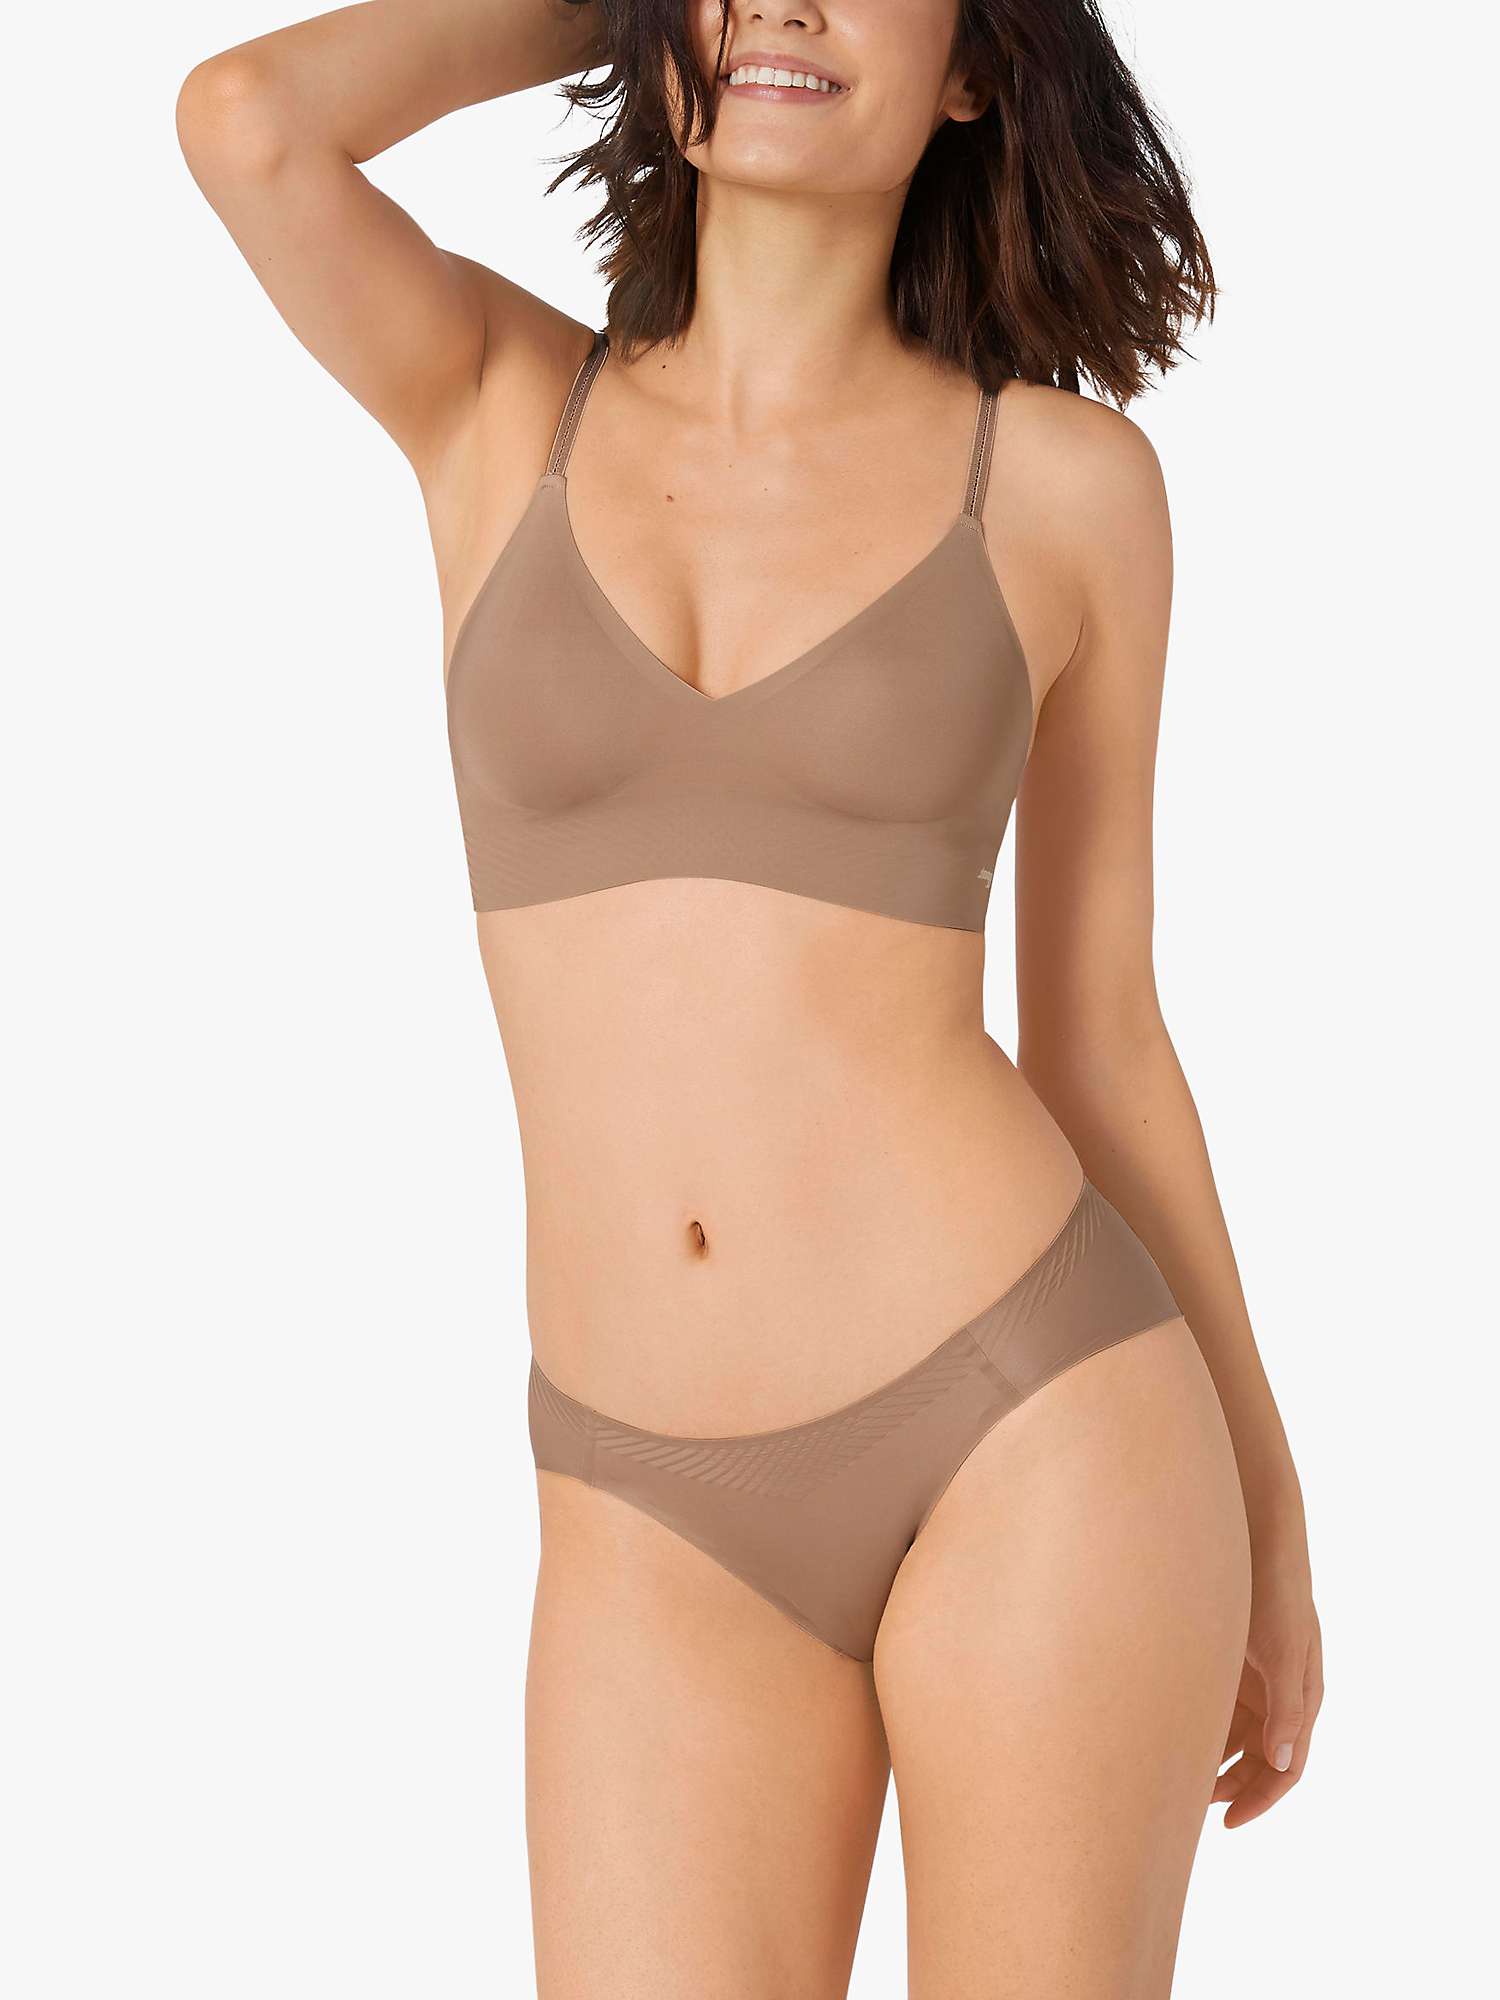 Buy sloggi Body Adapt Hipster Knickers Online at johnlewis.com